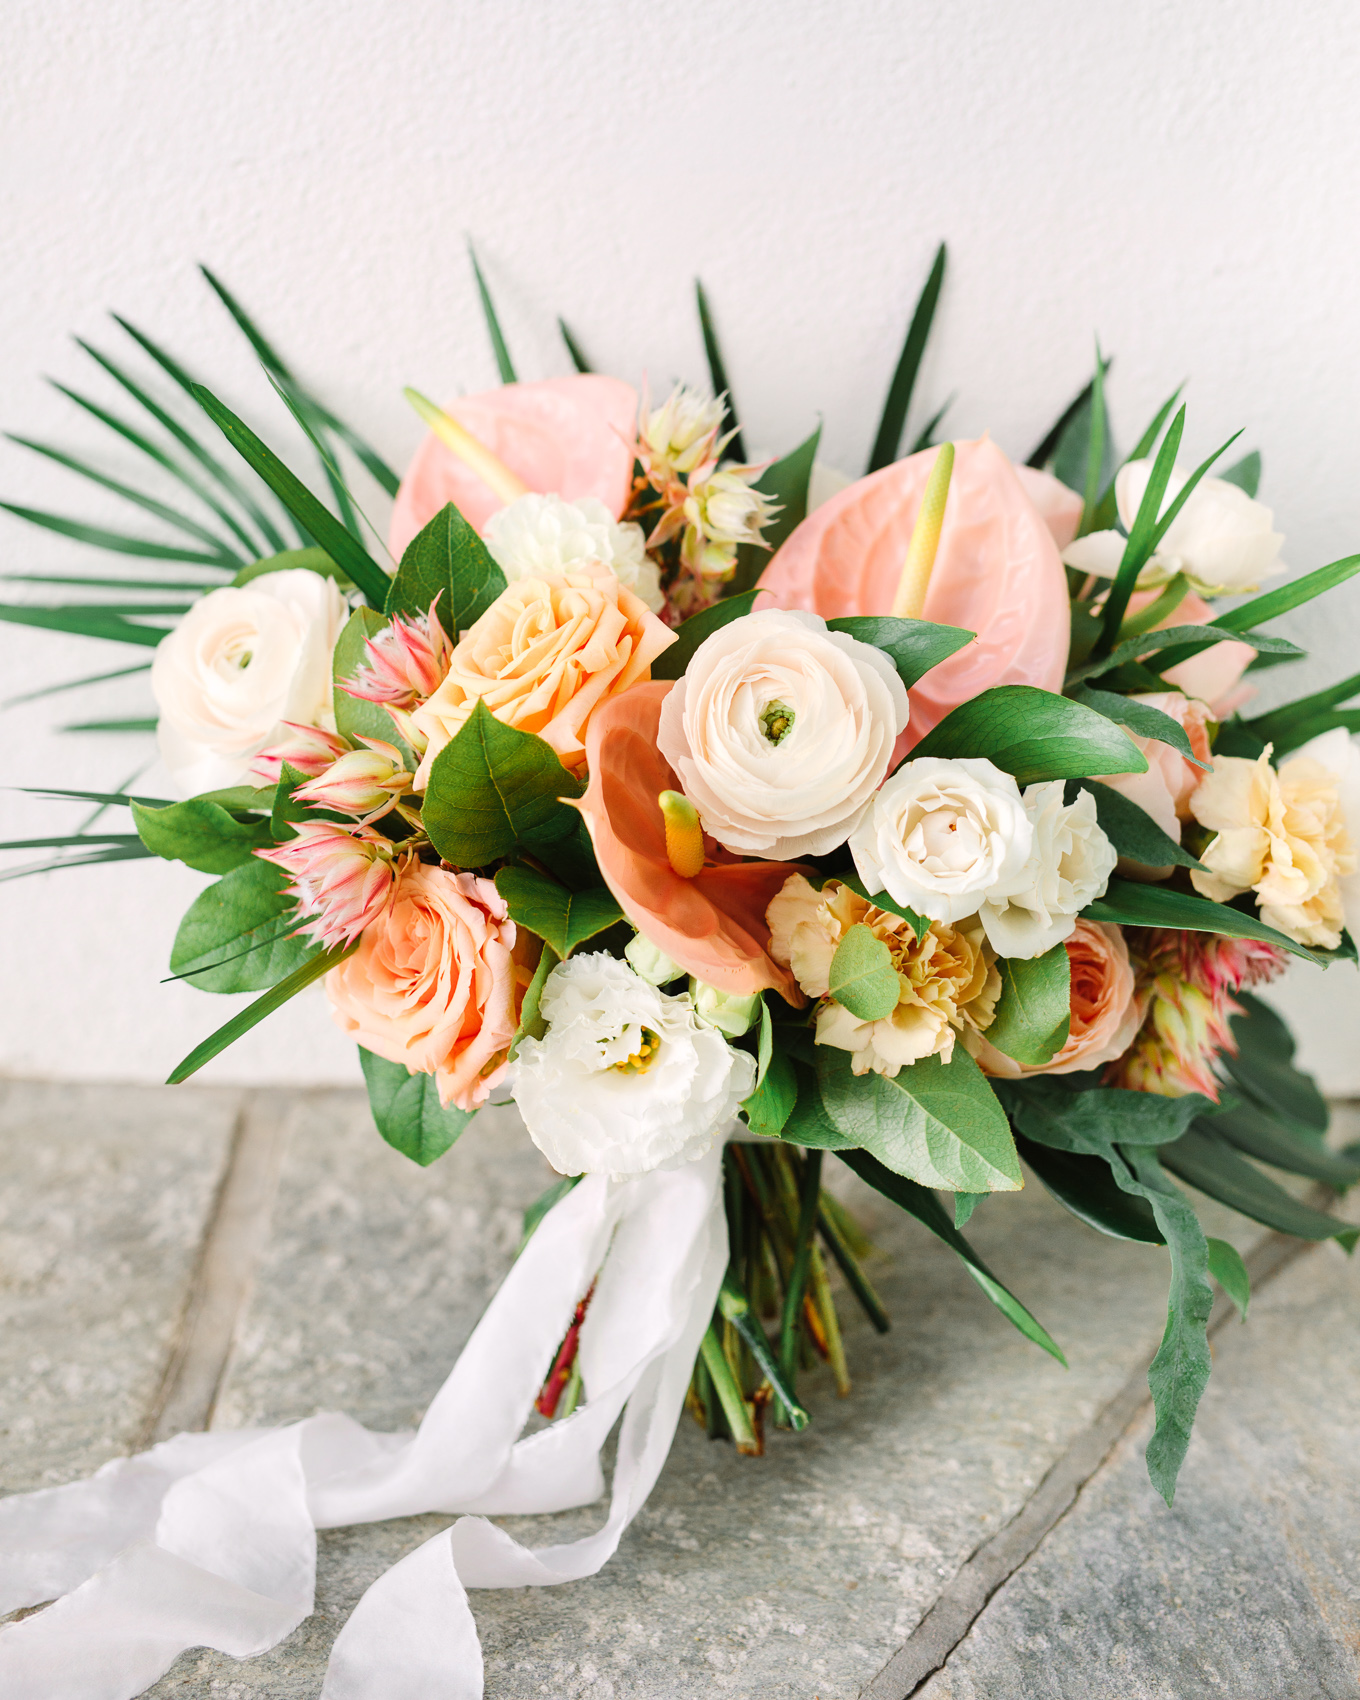 Neutral and peach tropical wedding flowers | Beautiful bridal bouquet inspiration and advice | Colorful and elevated wedding photography for fun-loving couples in Southern California | #weddingflowers #weddingbouquet #bridebouquet #bouquetideas #uniquebouquet   Source: Mary Costa Photography | Los Angeles